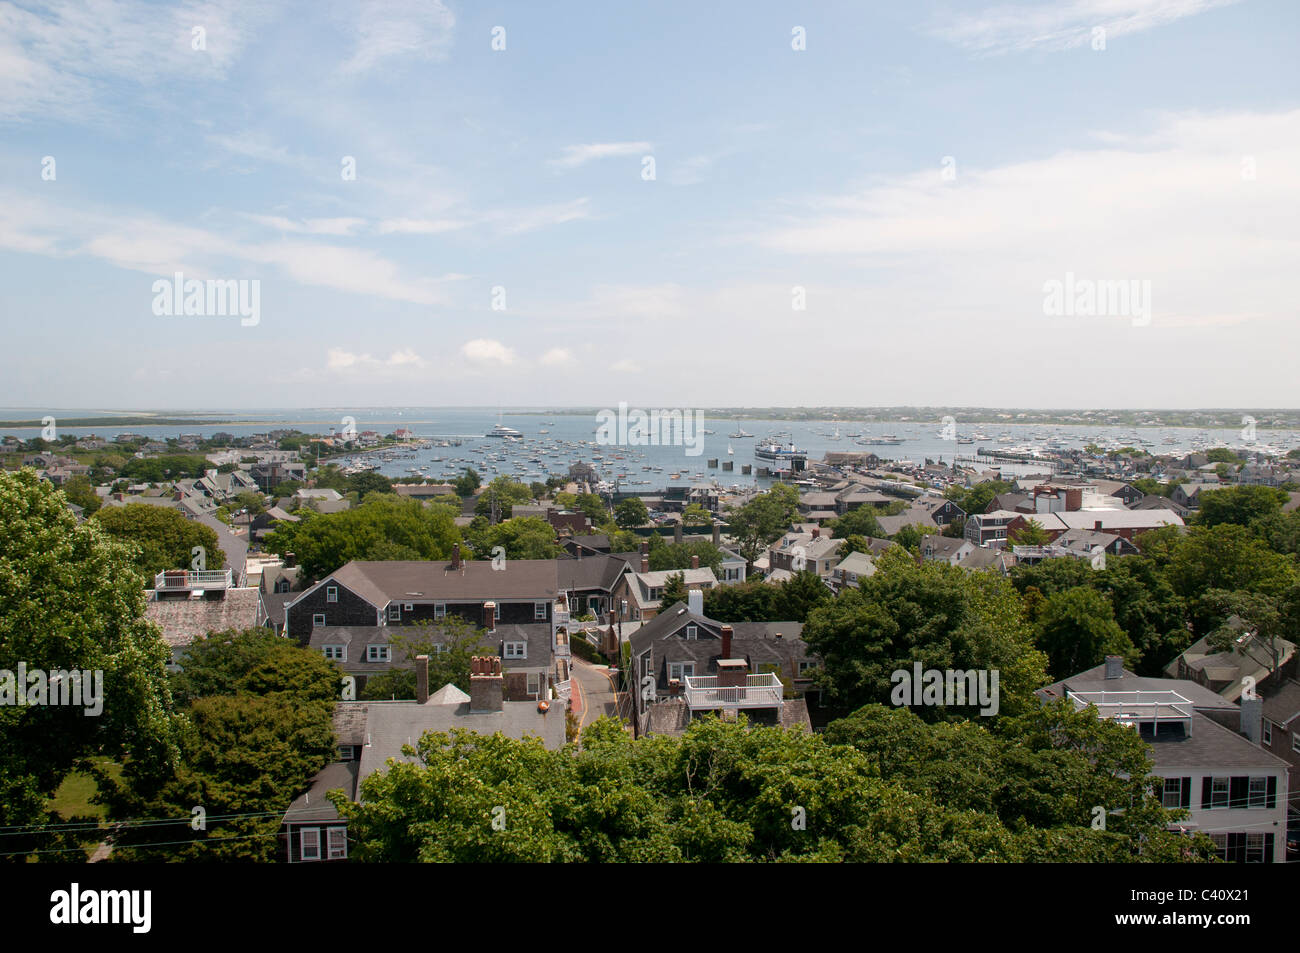 A view of Nantucket Town and harbor from the First Congressional Church. Stock Photo